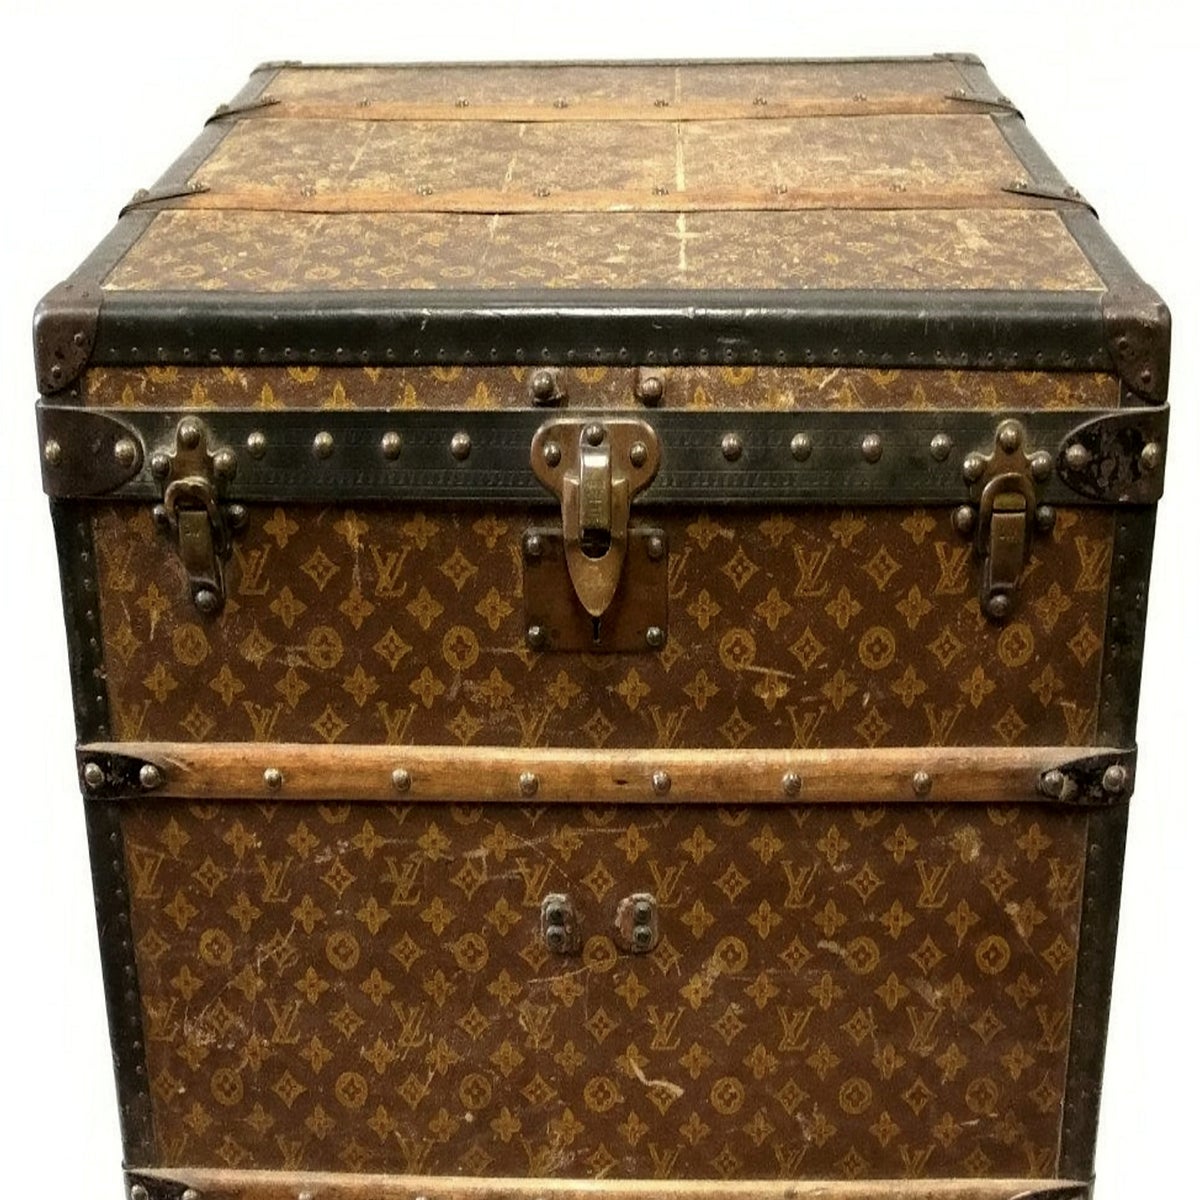 Old $14 Storage Box Turns Out To Be Rare Louis Vuitton Case Worth Thousands